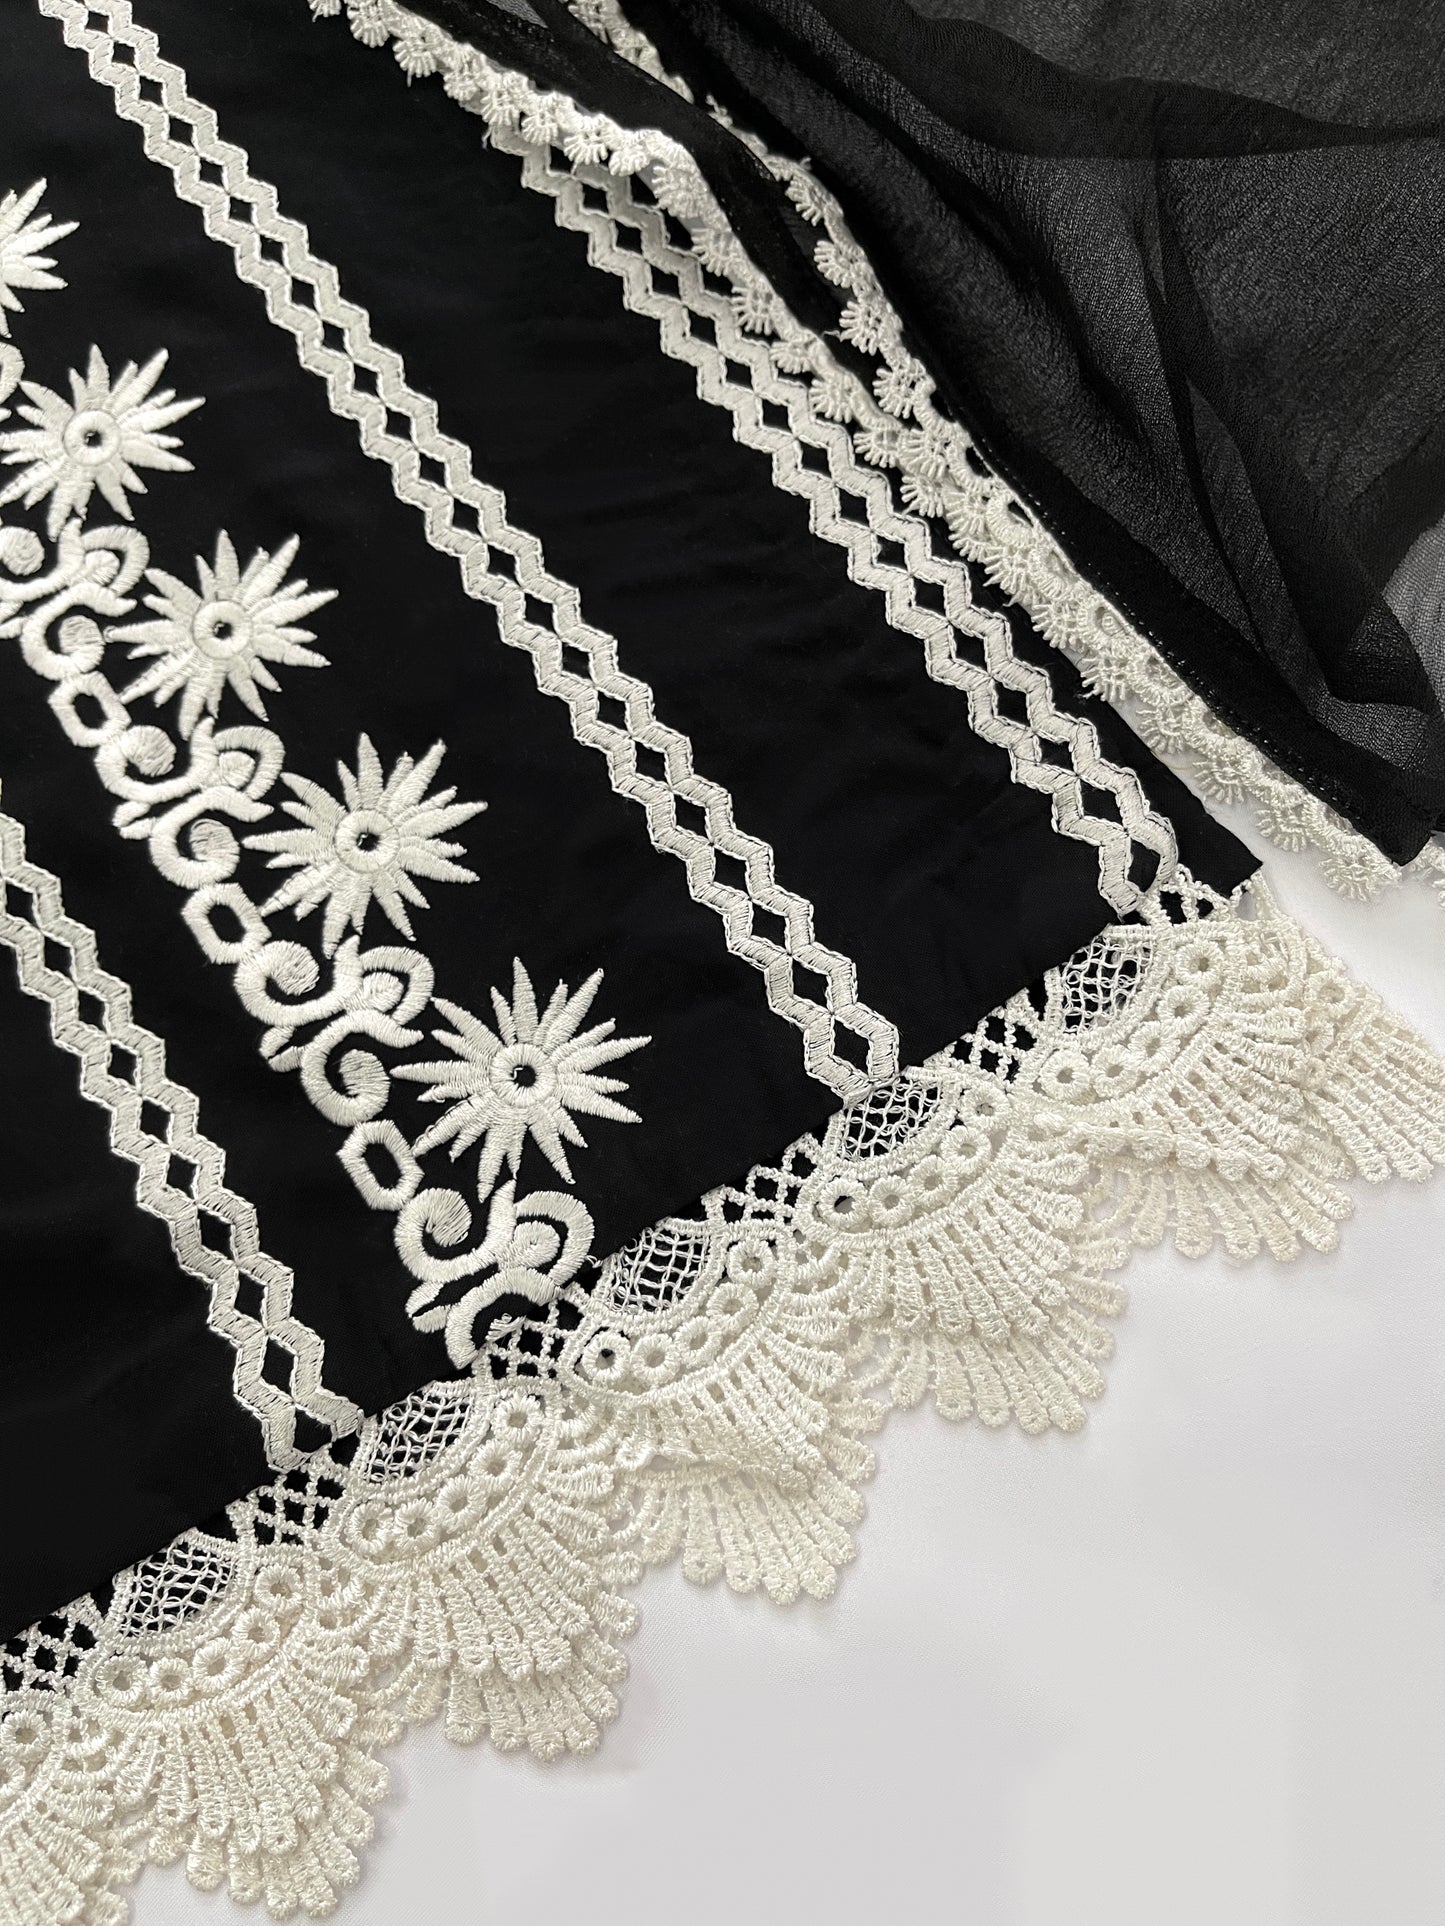 TAHERA - 3 Piece Black Linen Suit with White Lace and Embroidery